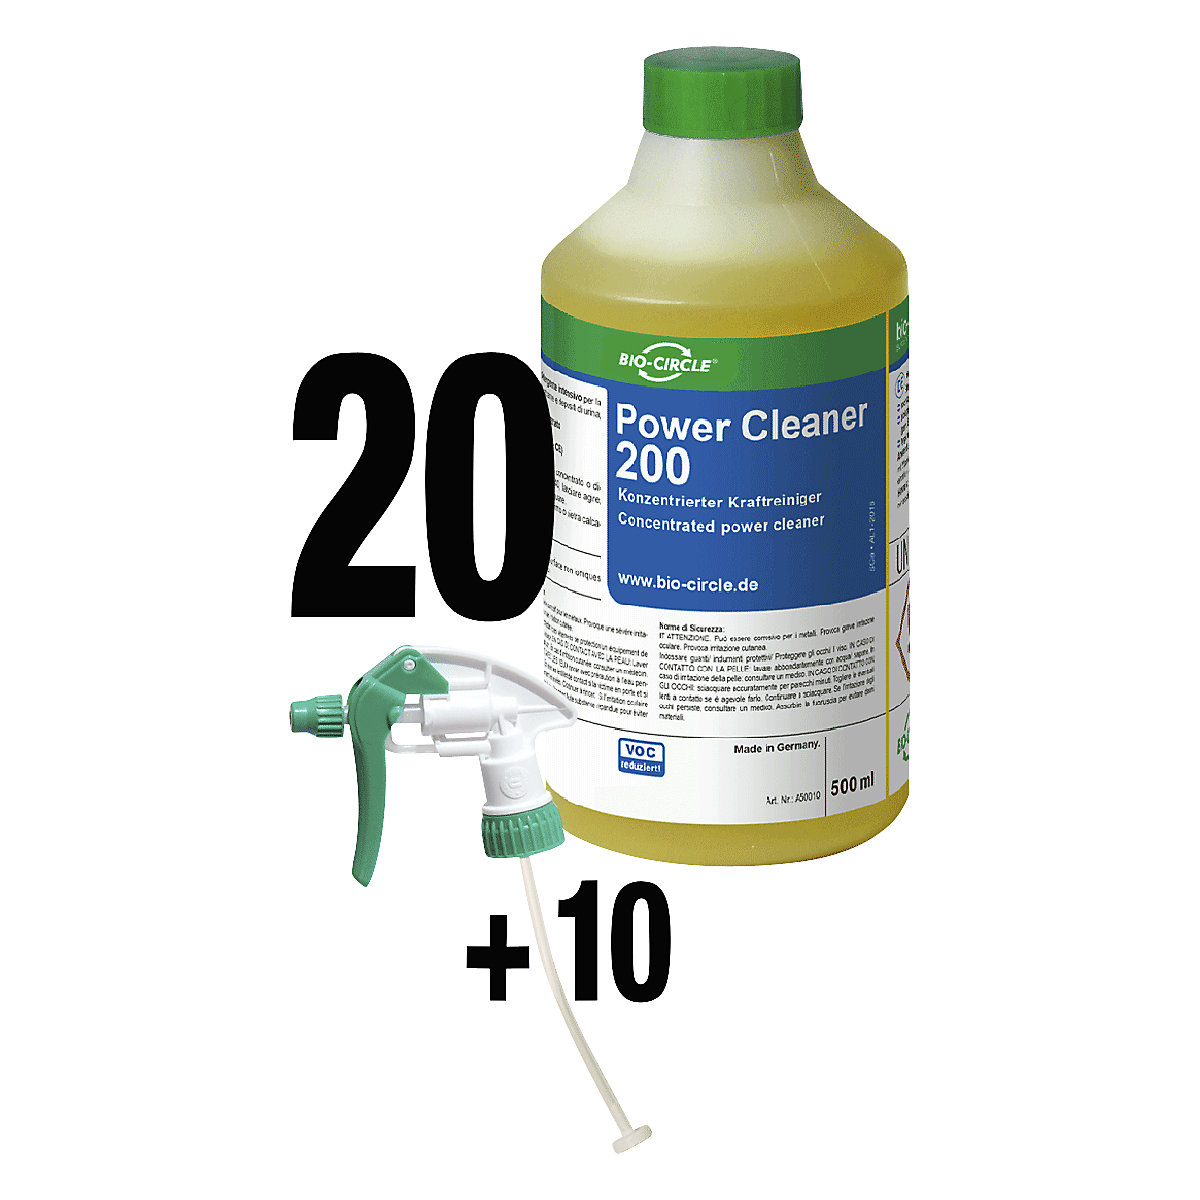 Power Cleaner 200 intensive cleaning concentrate - Bio-Circle